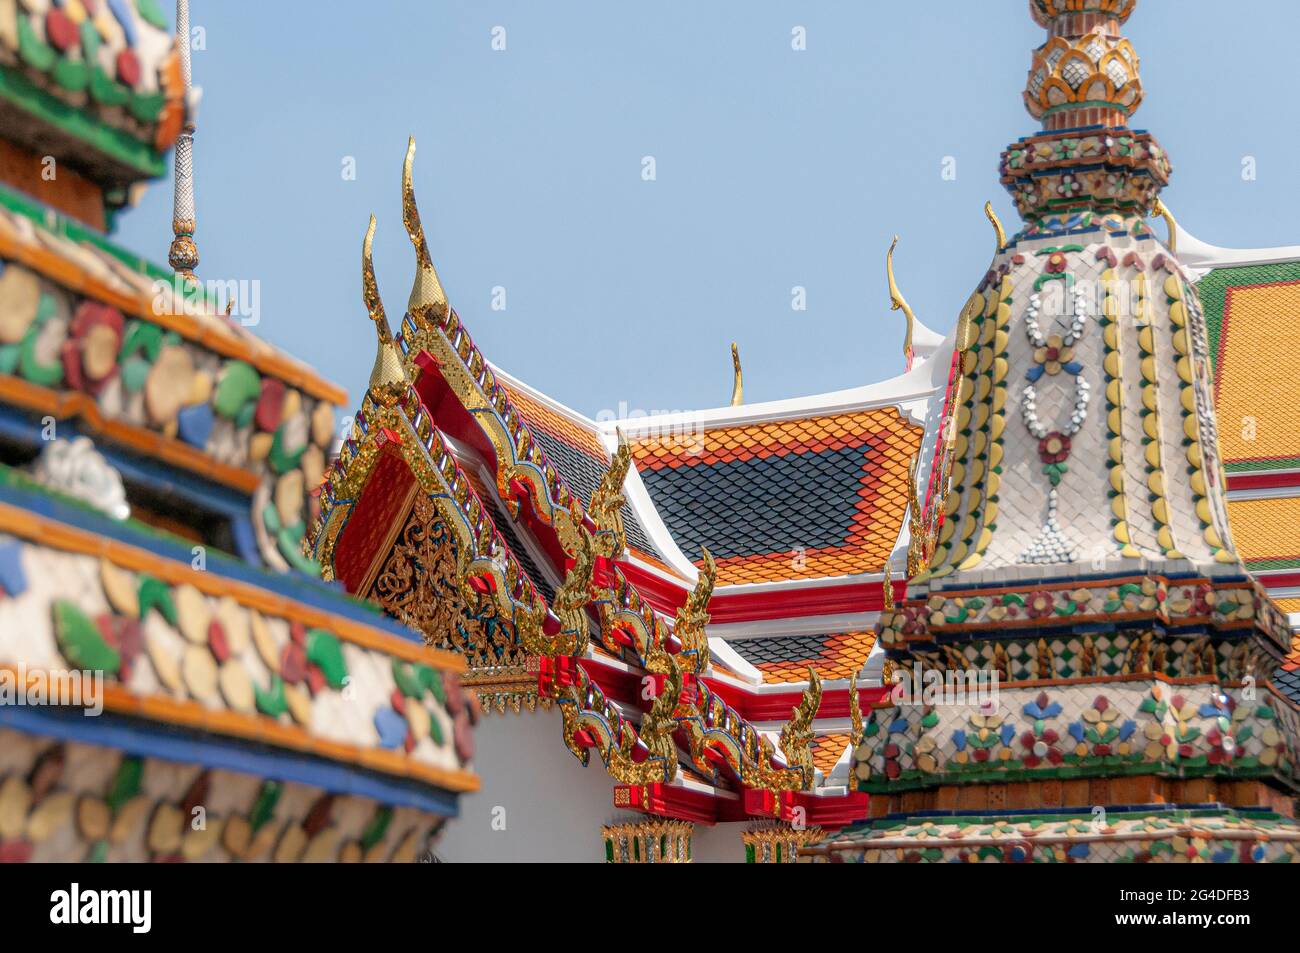 Highly ornate colourful decoration at Wat Pho Wat Po Buddhist temple in Bangkok in Thailand in South East Asia. Stock Photo